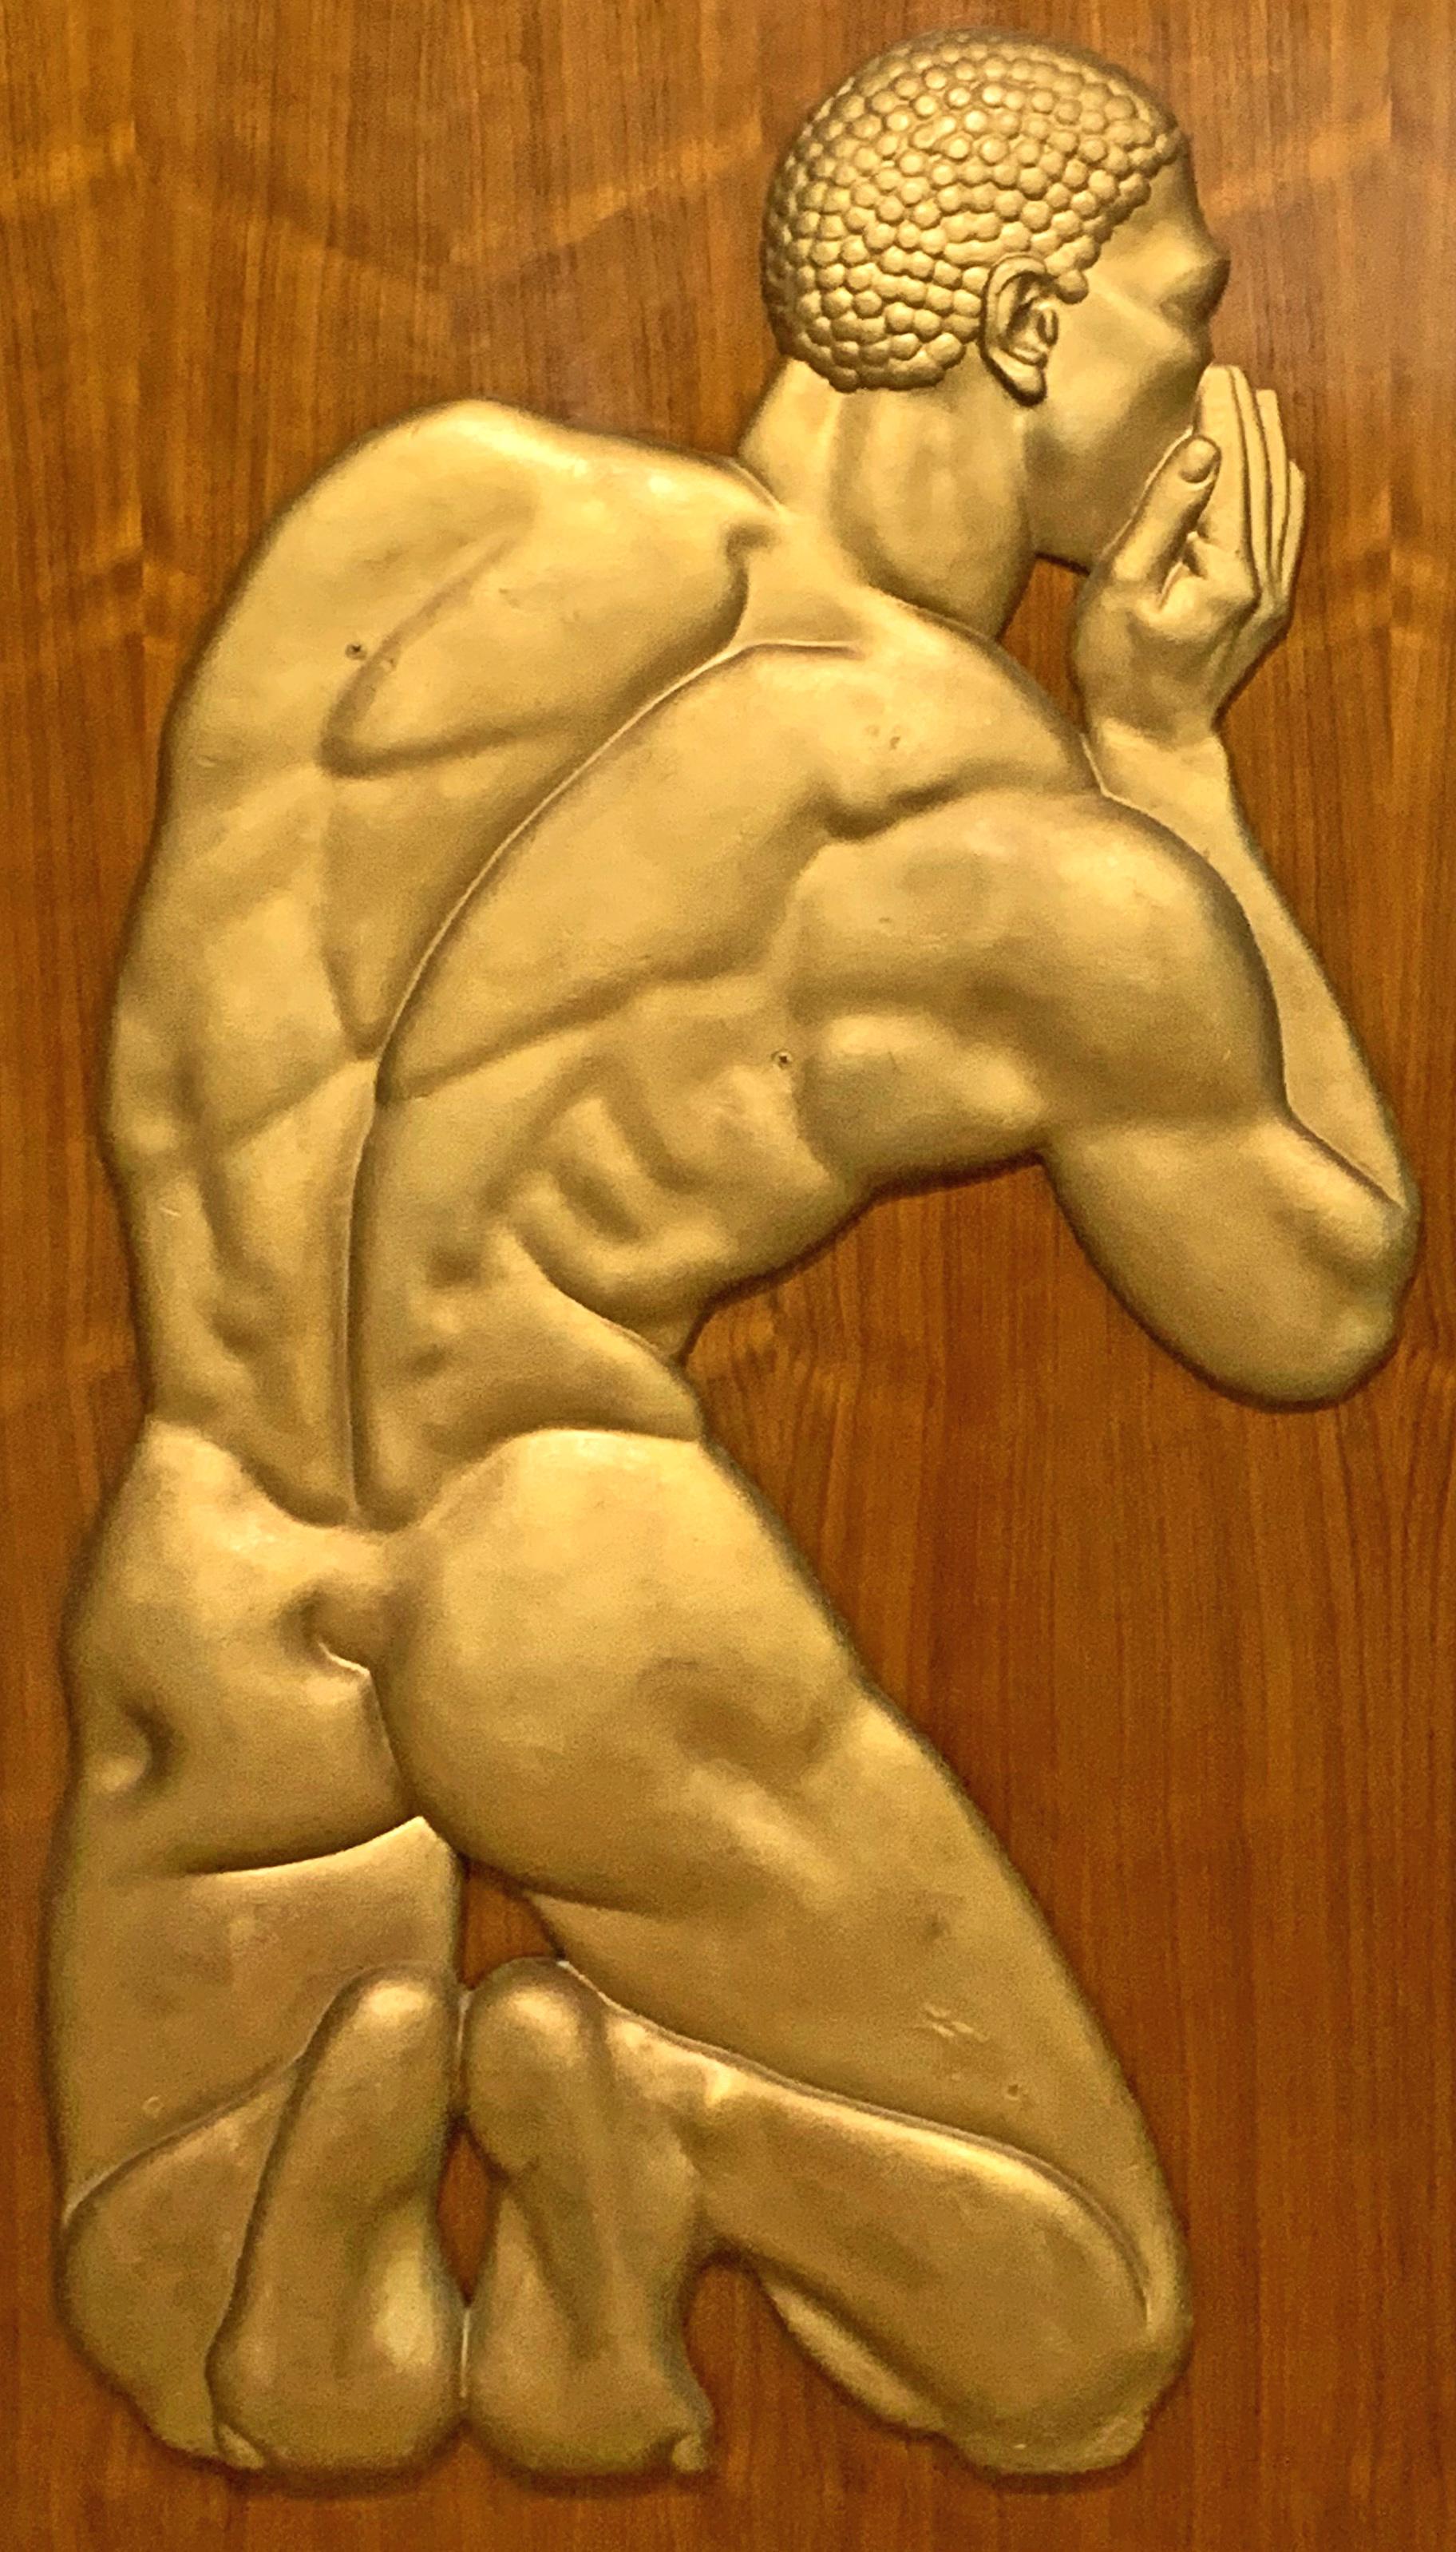 Extremely fine and unique, this large gold-finished plaster bas relief sculpture of a kneeling Black male figure, whispering into the ear of an unseen companion, once graced the lobby of an Art Deco hotel in Florida. The sculptor captured the form